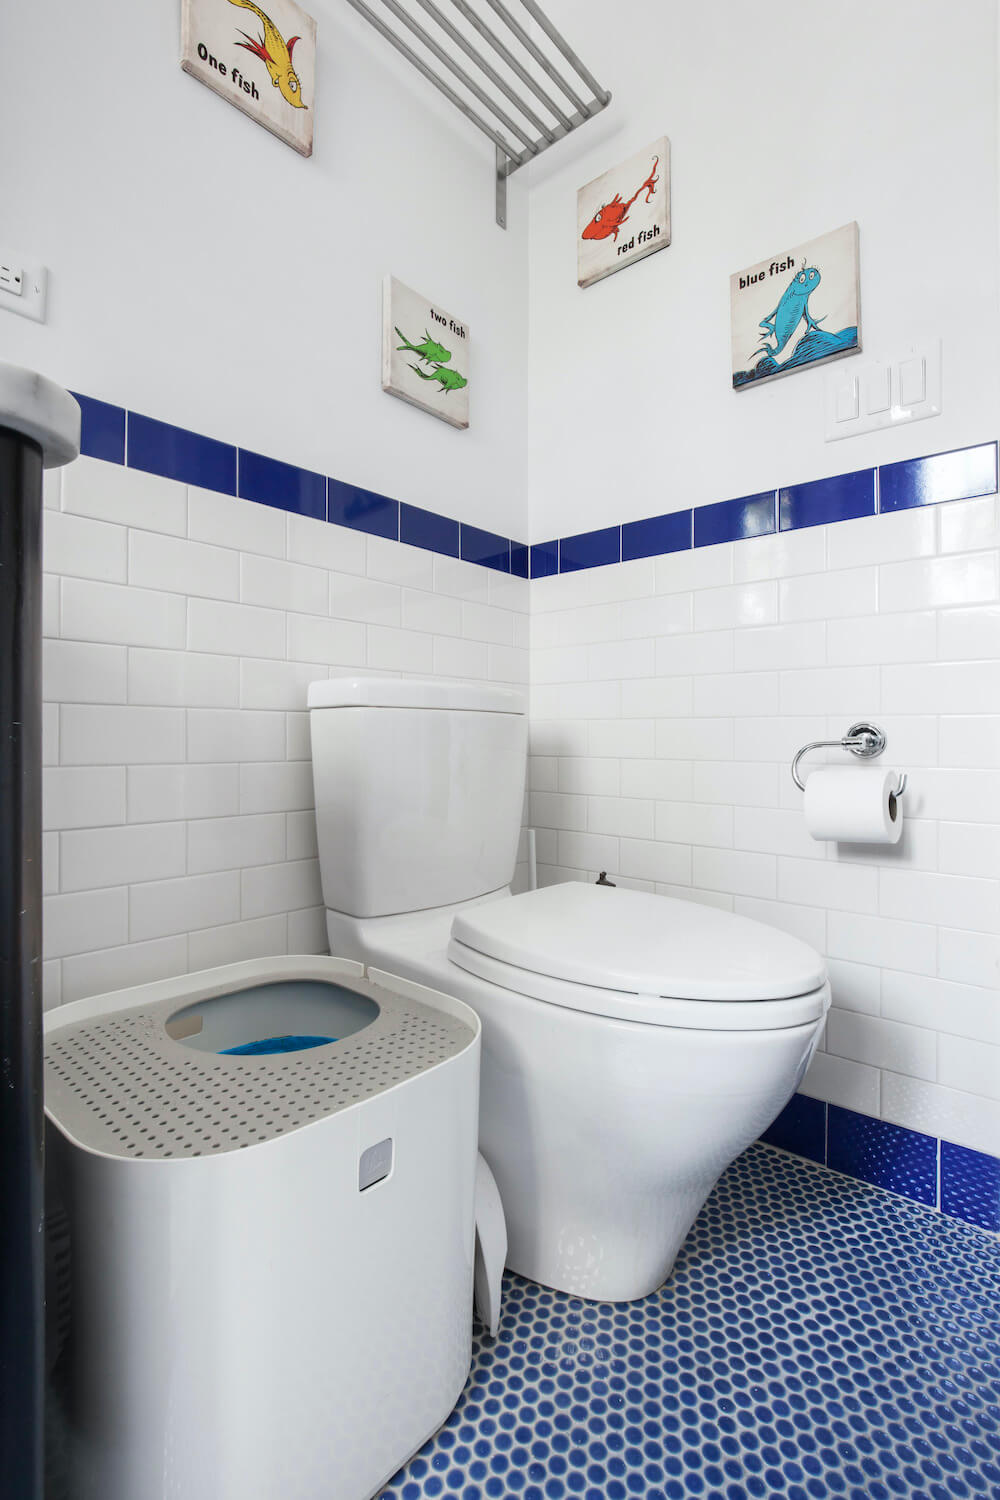 Blue penny round tiles with gray grouting along with white subway tiles after renovation 